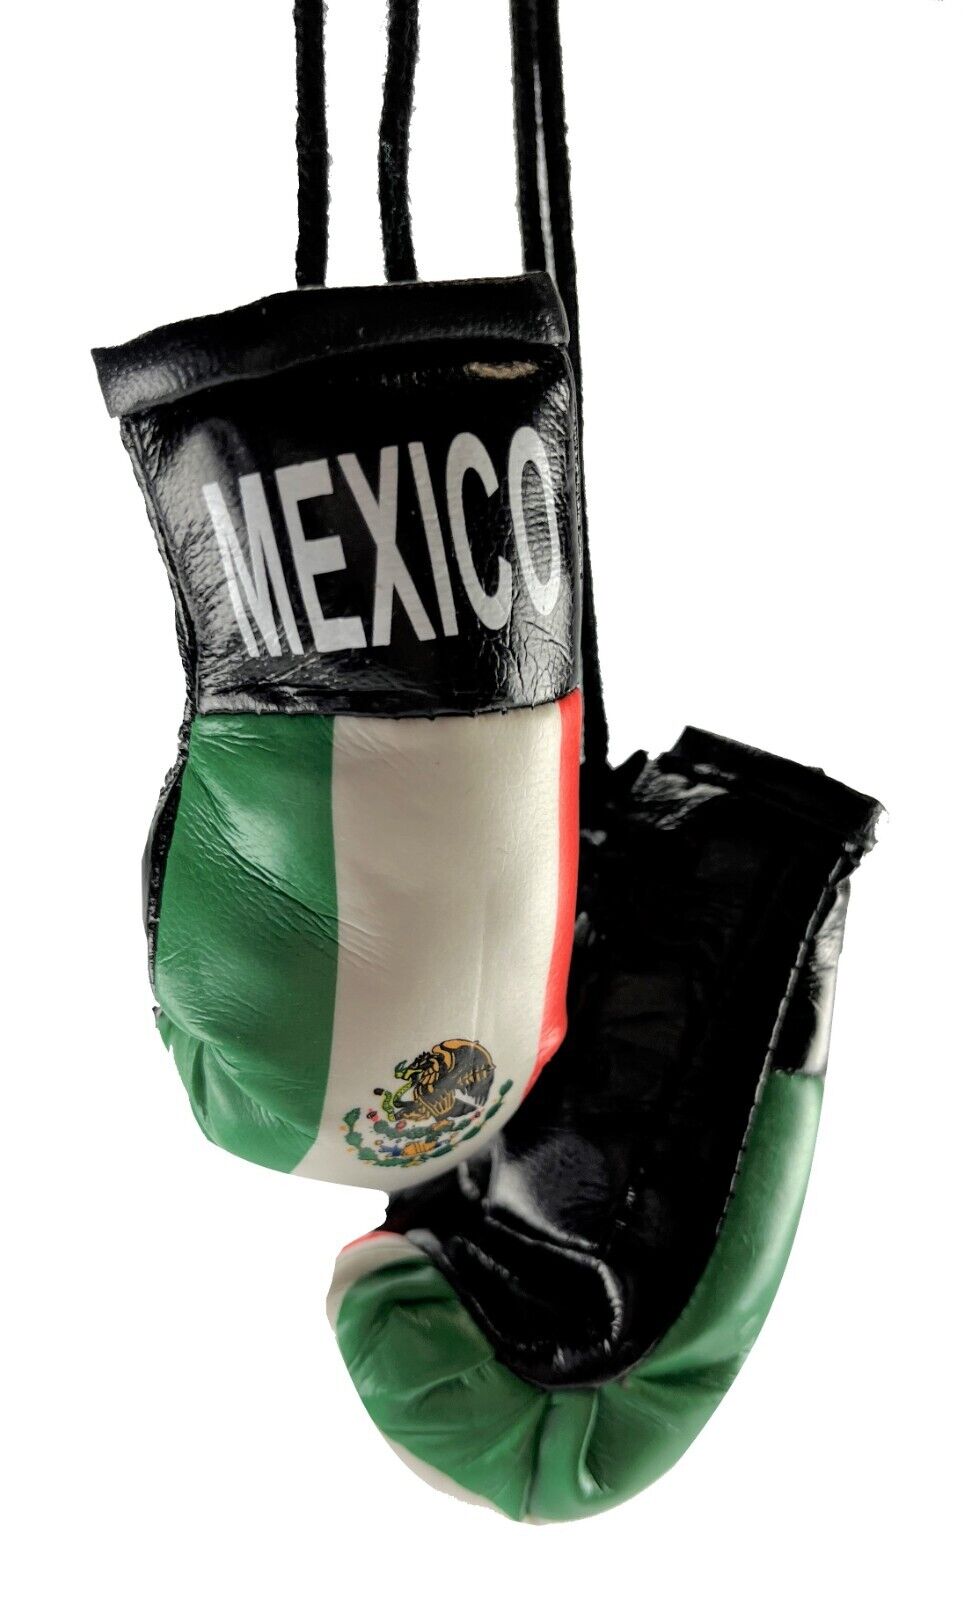 Lot of 100 Mini Boxing Gloves Wholesale MEXICO National Pride MMA Boxing Gloves